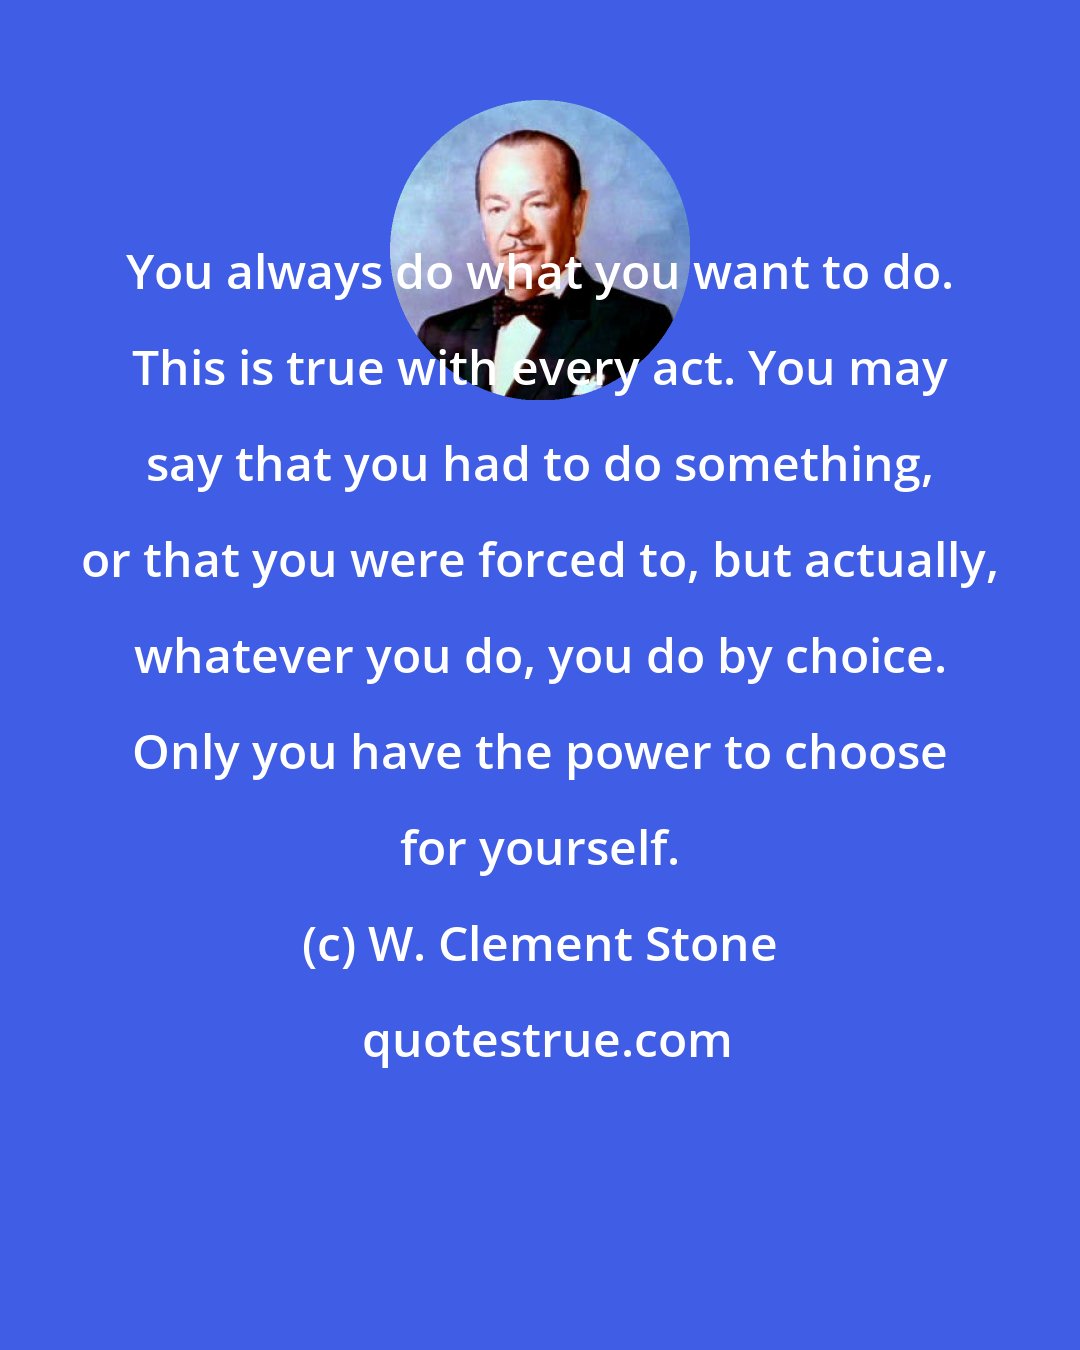 W. Clement Stone: You always do what you want to do. This is true with every act. You may say that you had to do something, or that you were forced to, but actually, whatever you do, you do by choice. Only you have the power to choose for yourself.